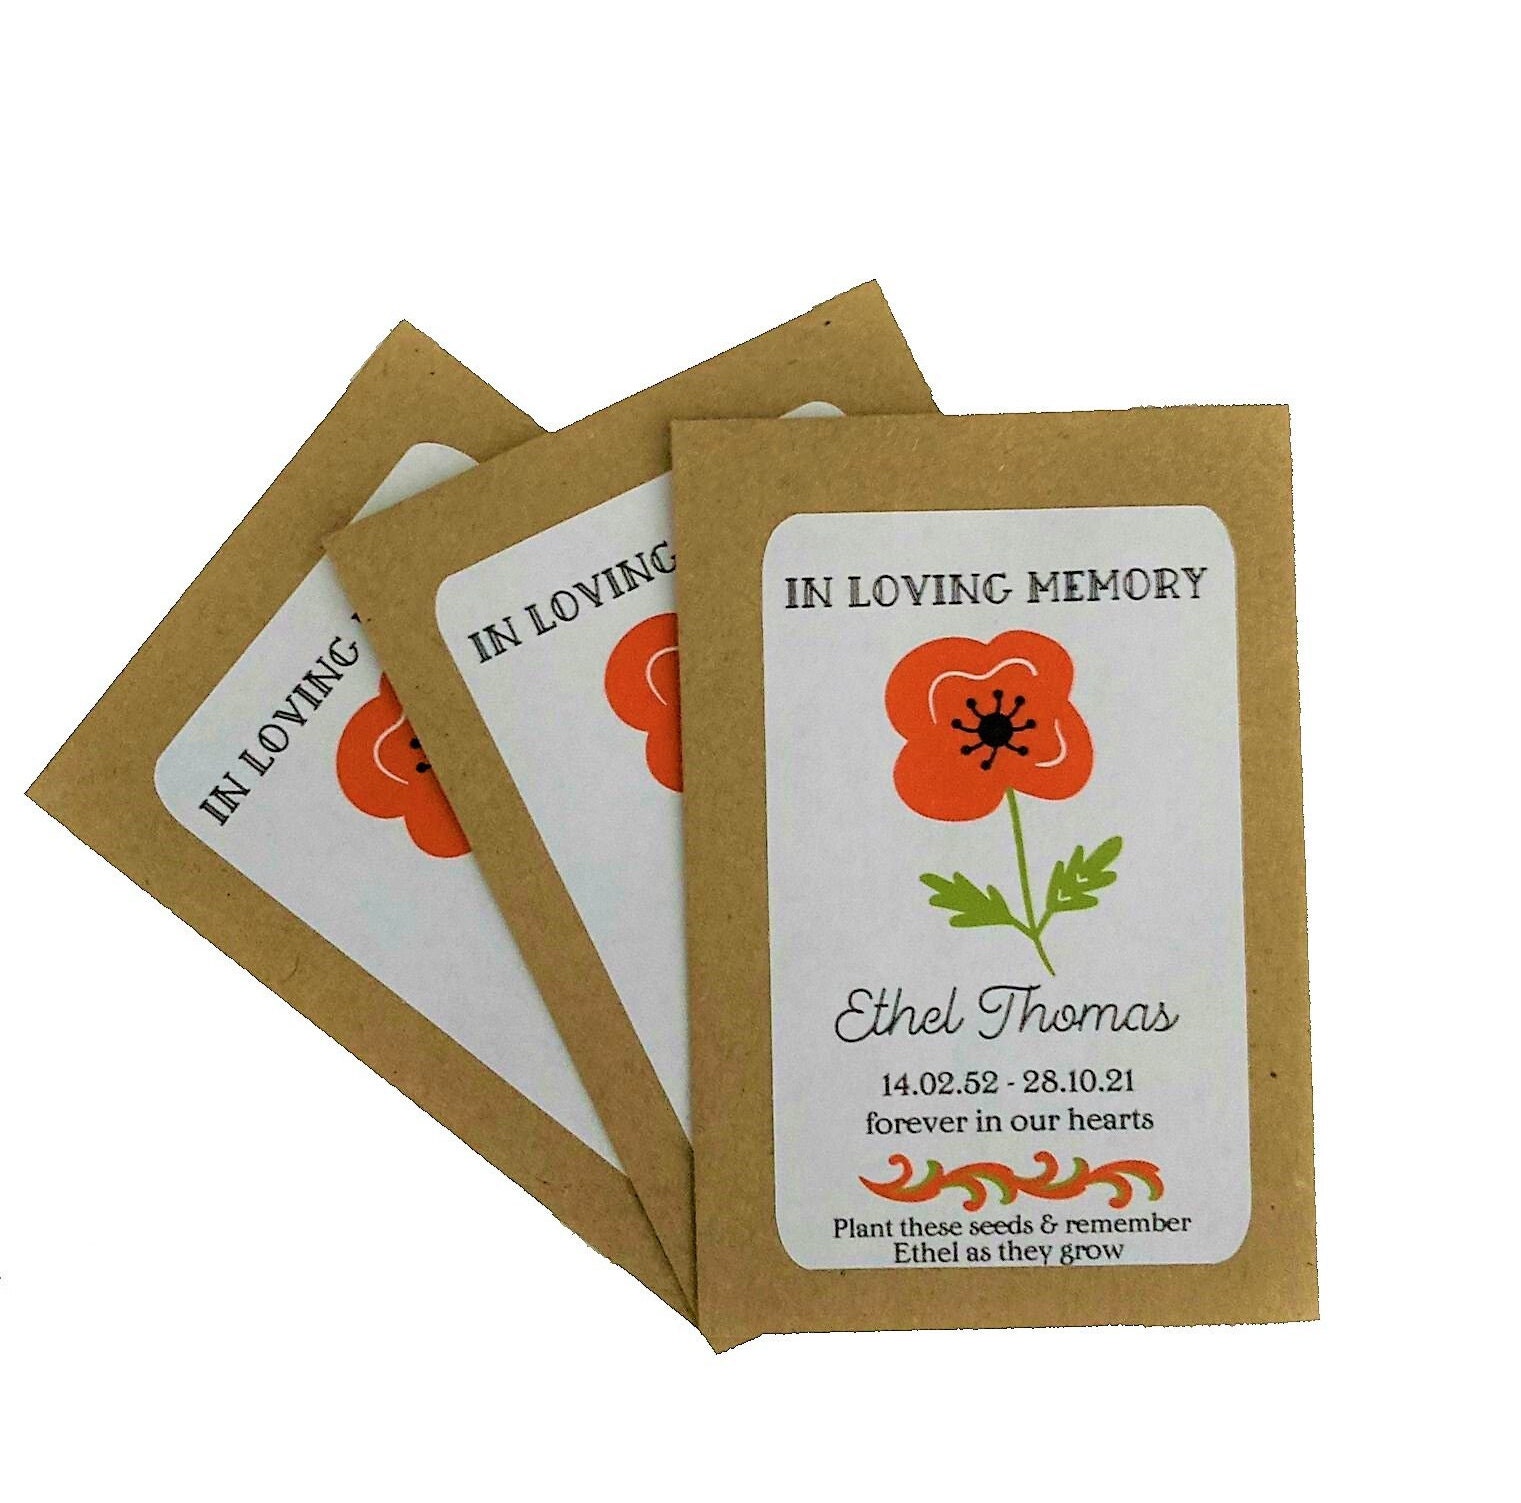 Personalised Funeral Forget Me Not Flower Seed Packets Envelopes With Seeds  Memorial Remembrance Favours Keepsake 